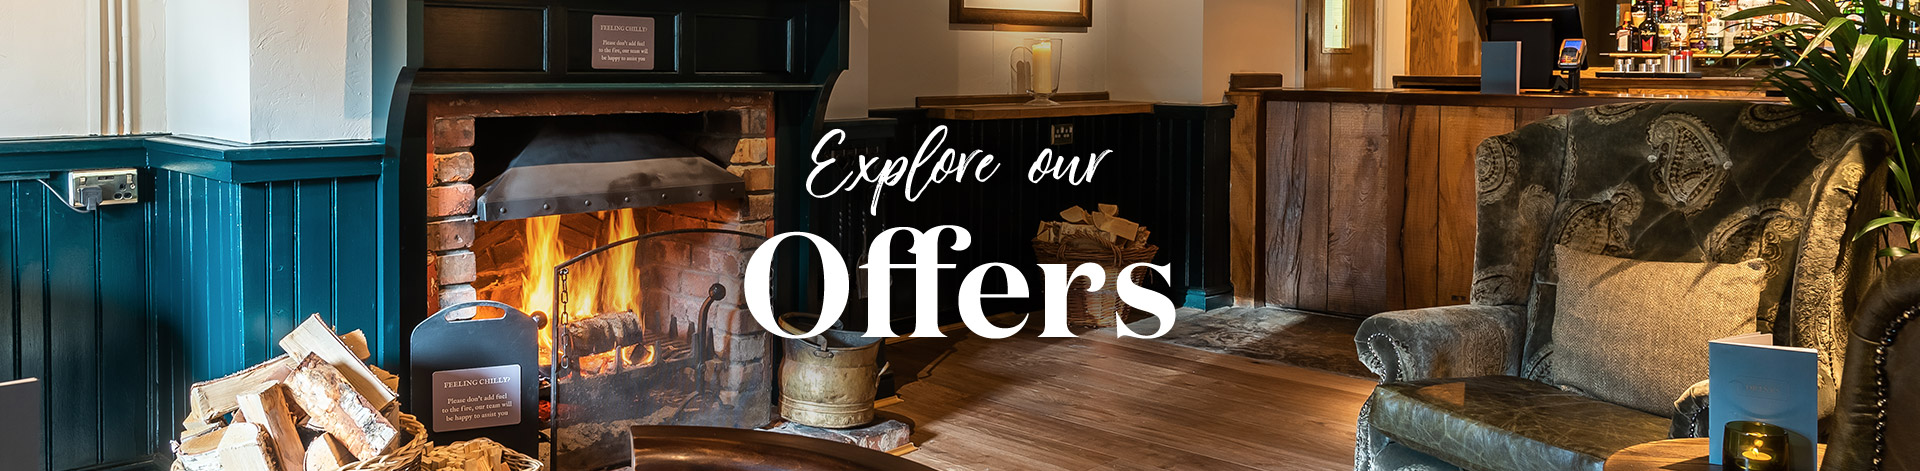 Our latest offers at The Quorndon Fox